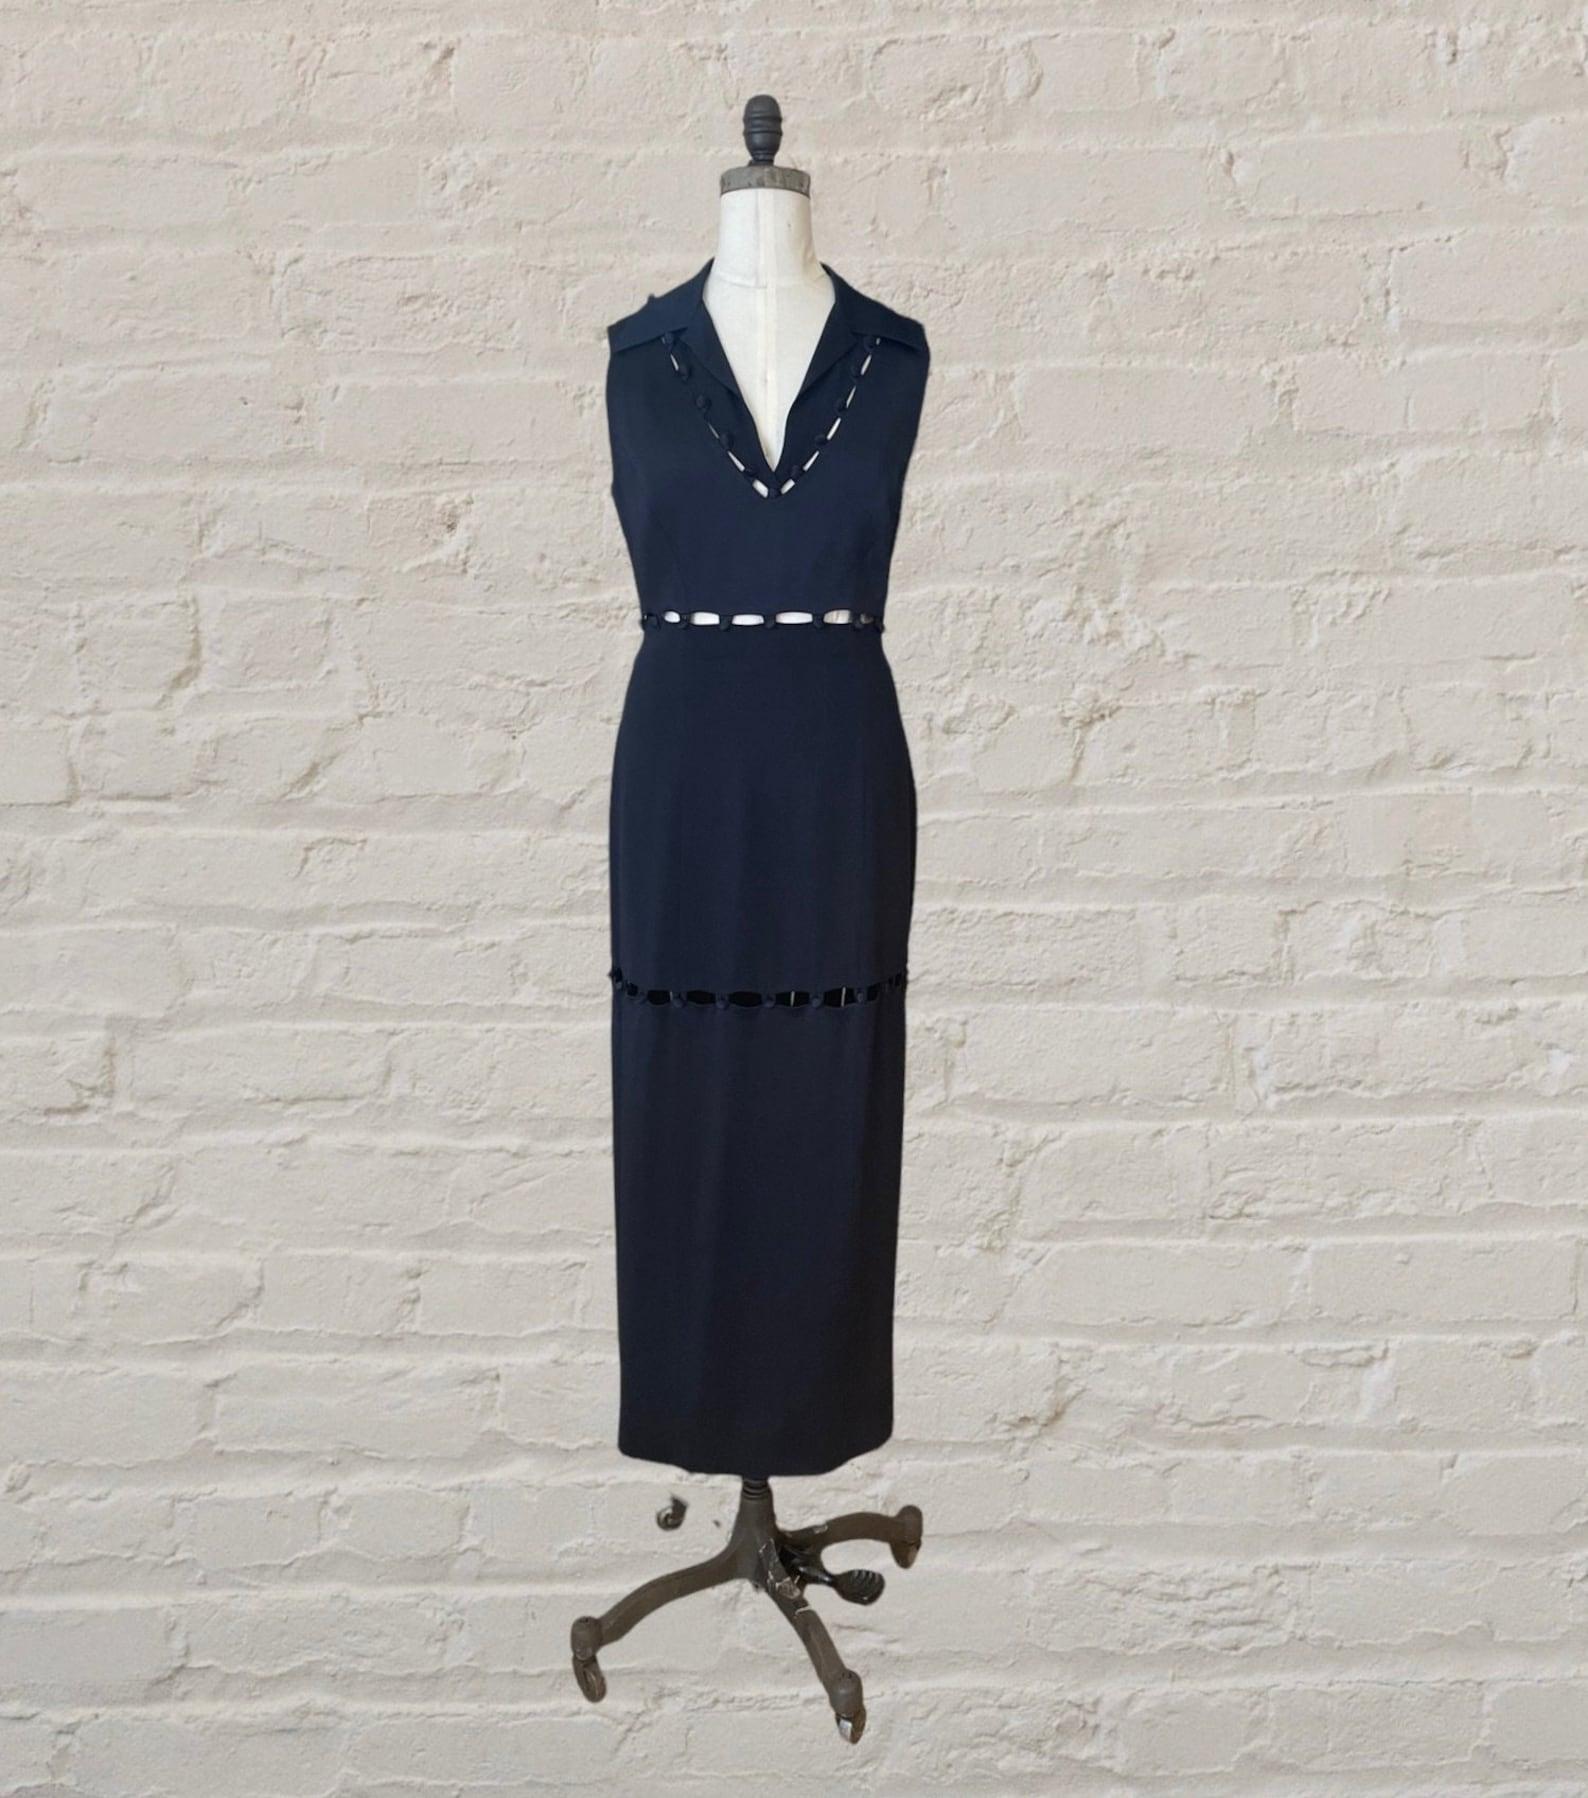 Moschino Cheap and Chic midnight blue ankle length dress. Straight sheath silhouette, winged collar, deep v neck, sleeveless. Peekaboo cut outs at bodice, back, waist and along the skirt. Button details are functional, top & skirt are fully